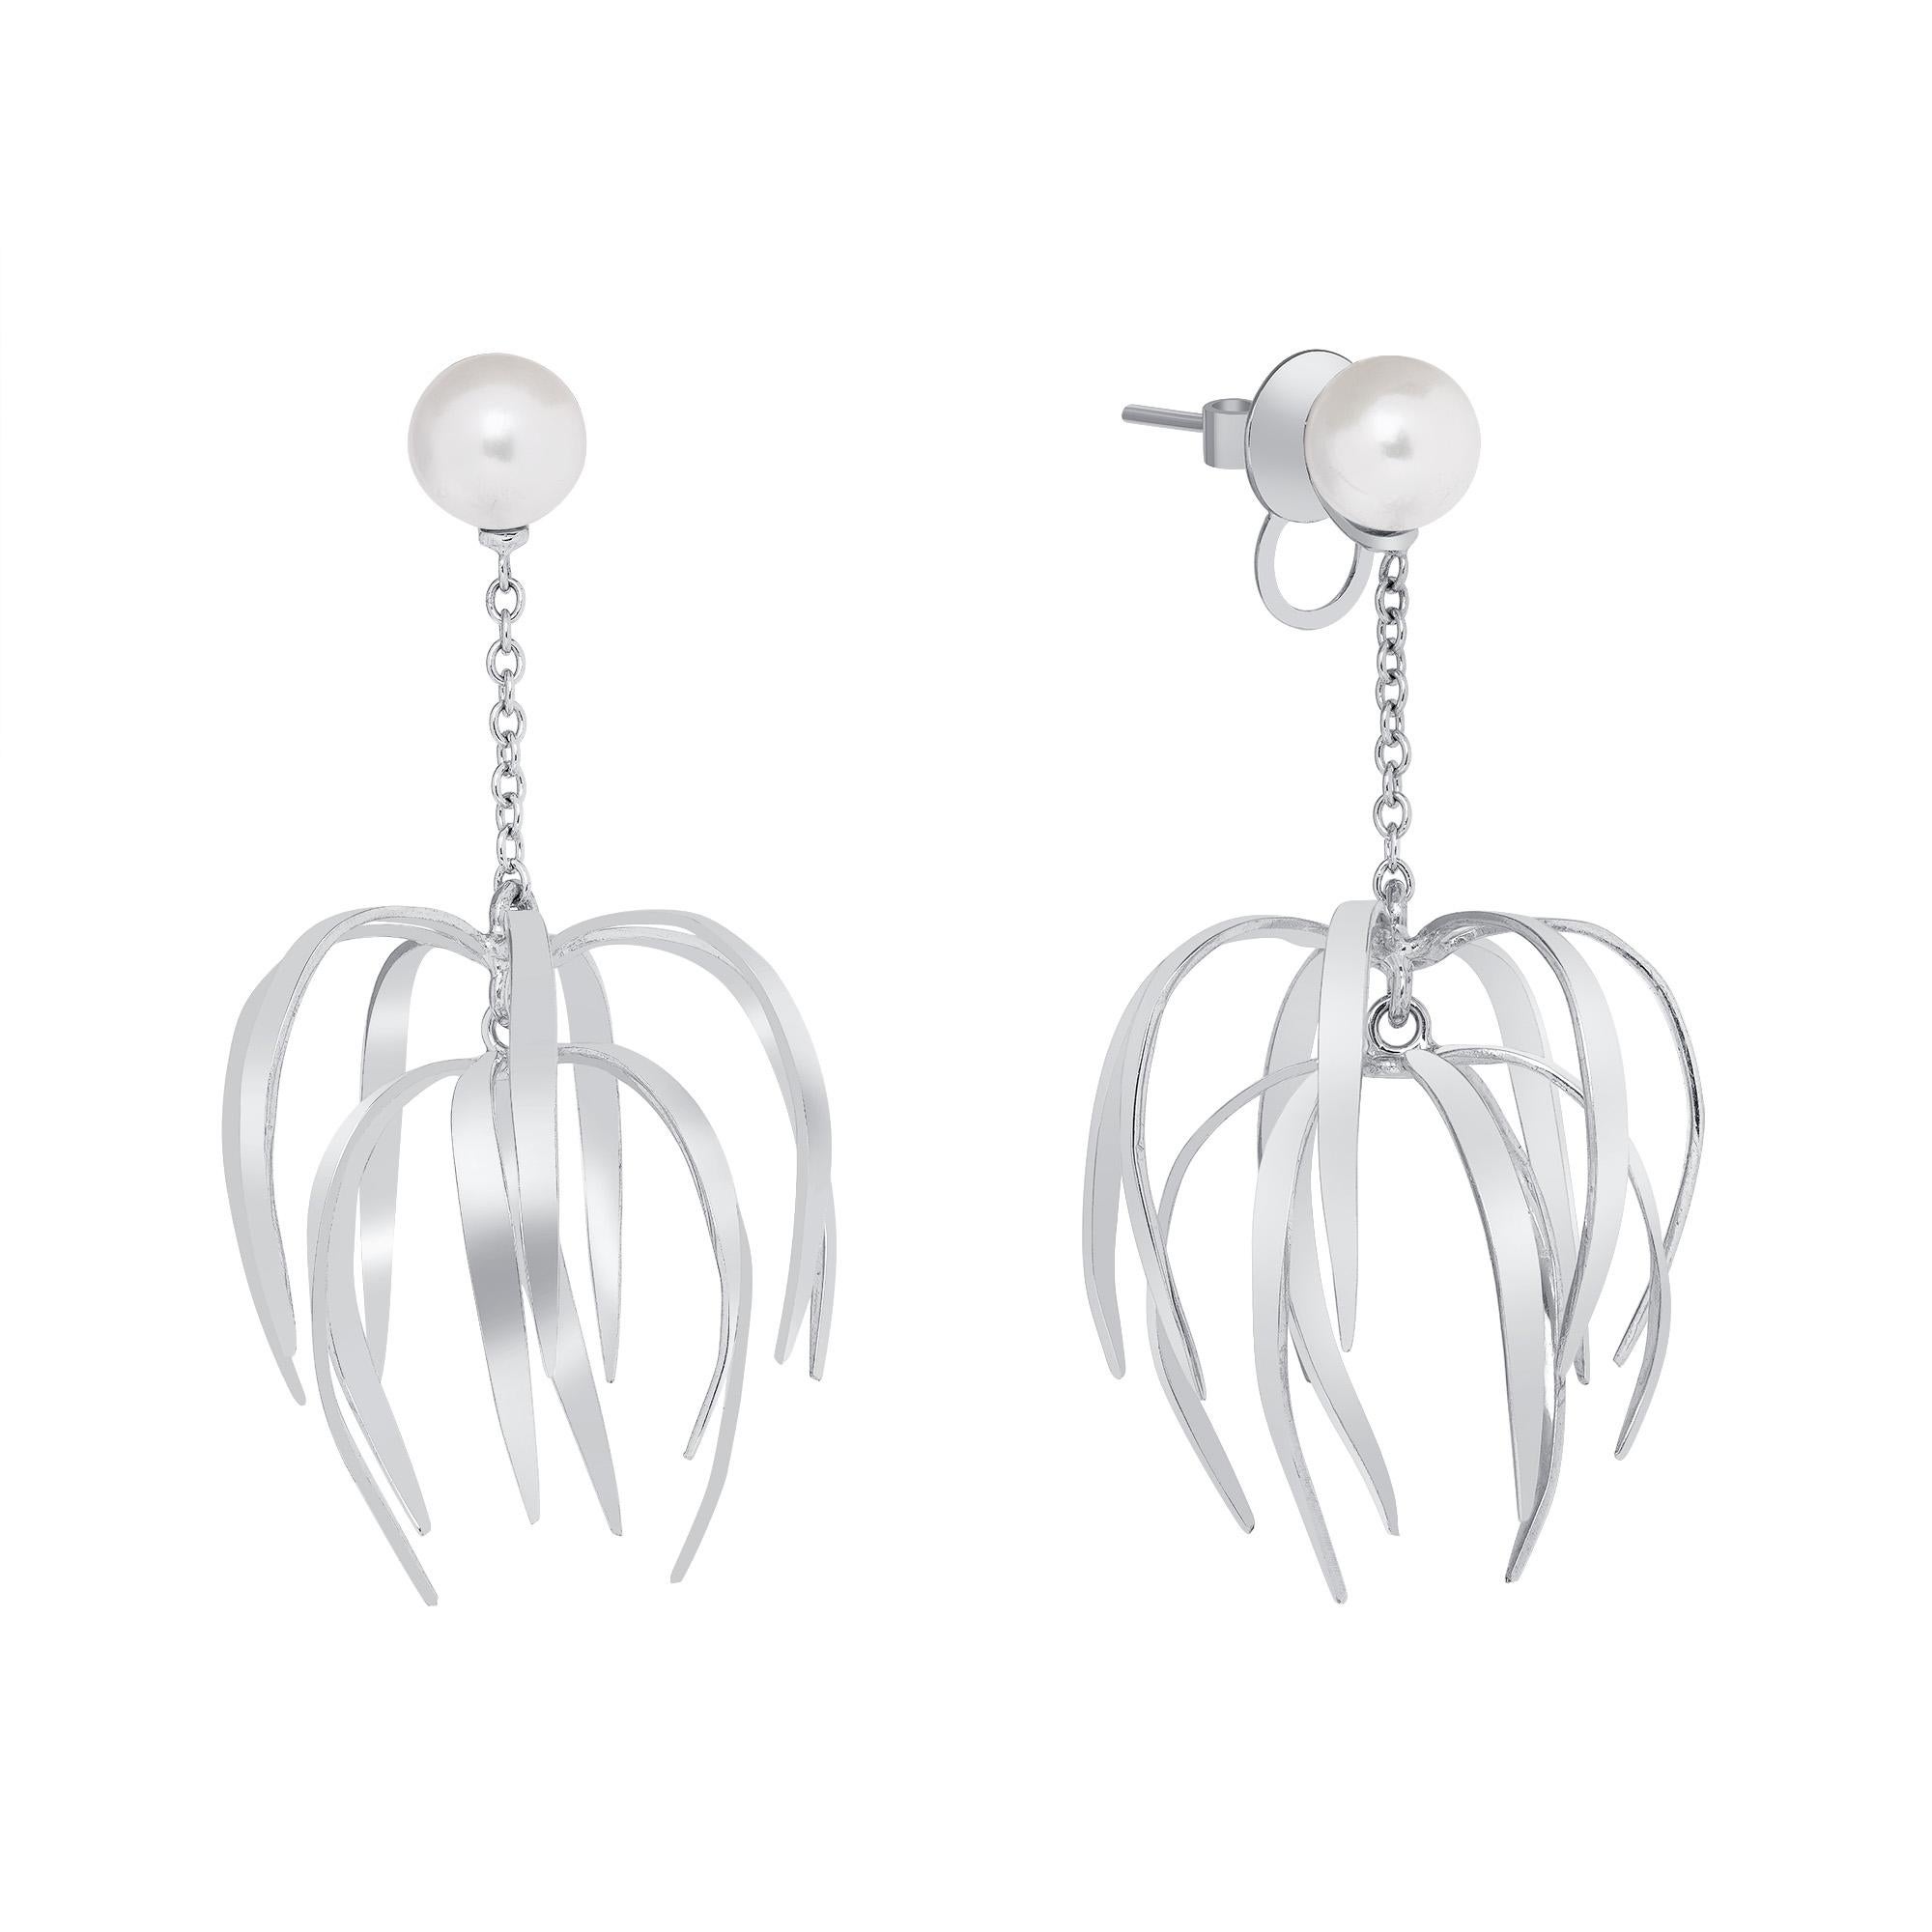 7 Millimeter Matching South Sea Pearl White Gold Chandelier Earrings. These 18-karat white gold chandelier earrings feature two identical 7-millimeter South Sea Pearls. They are handcrafted in 18 karat white gold with large ear nuts for stability.